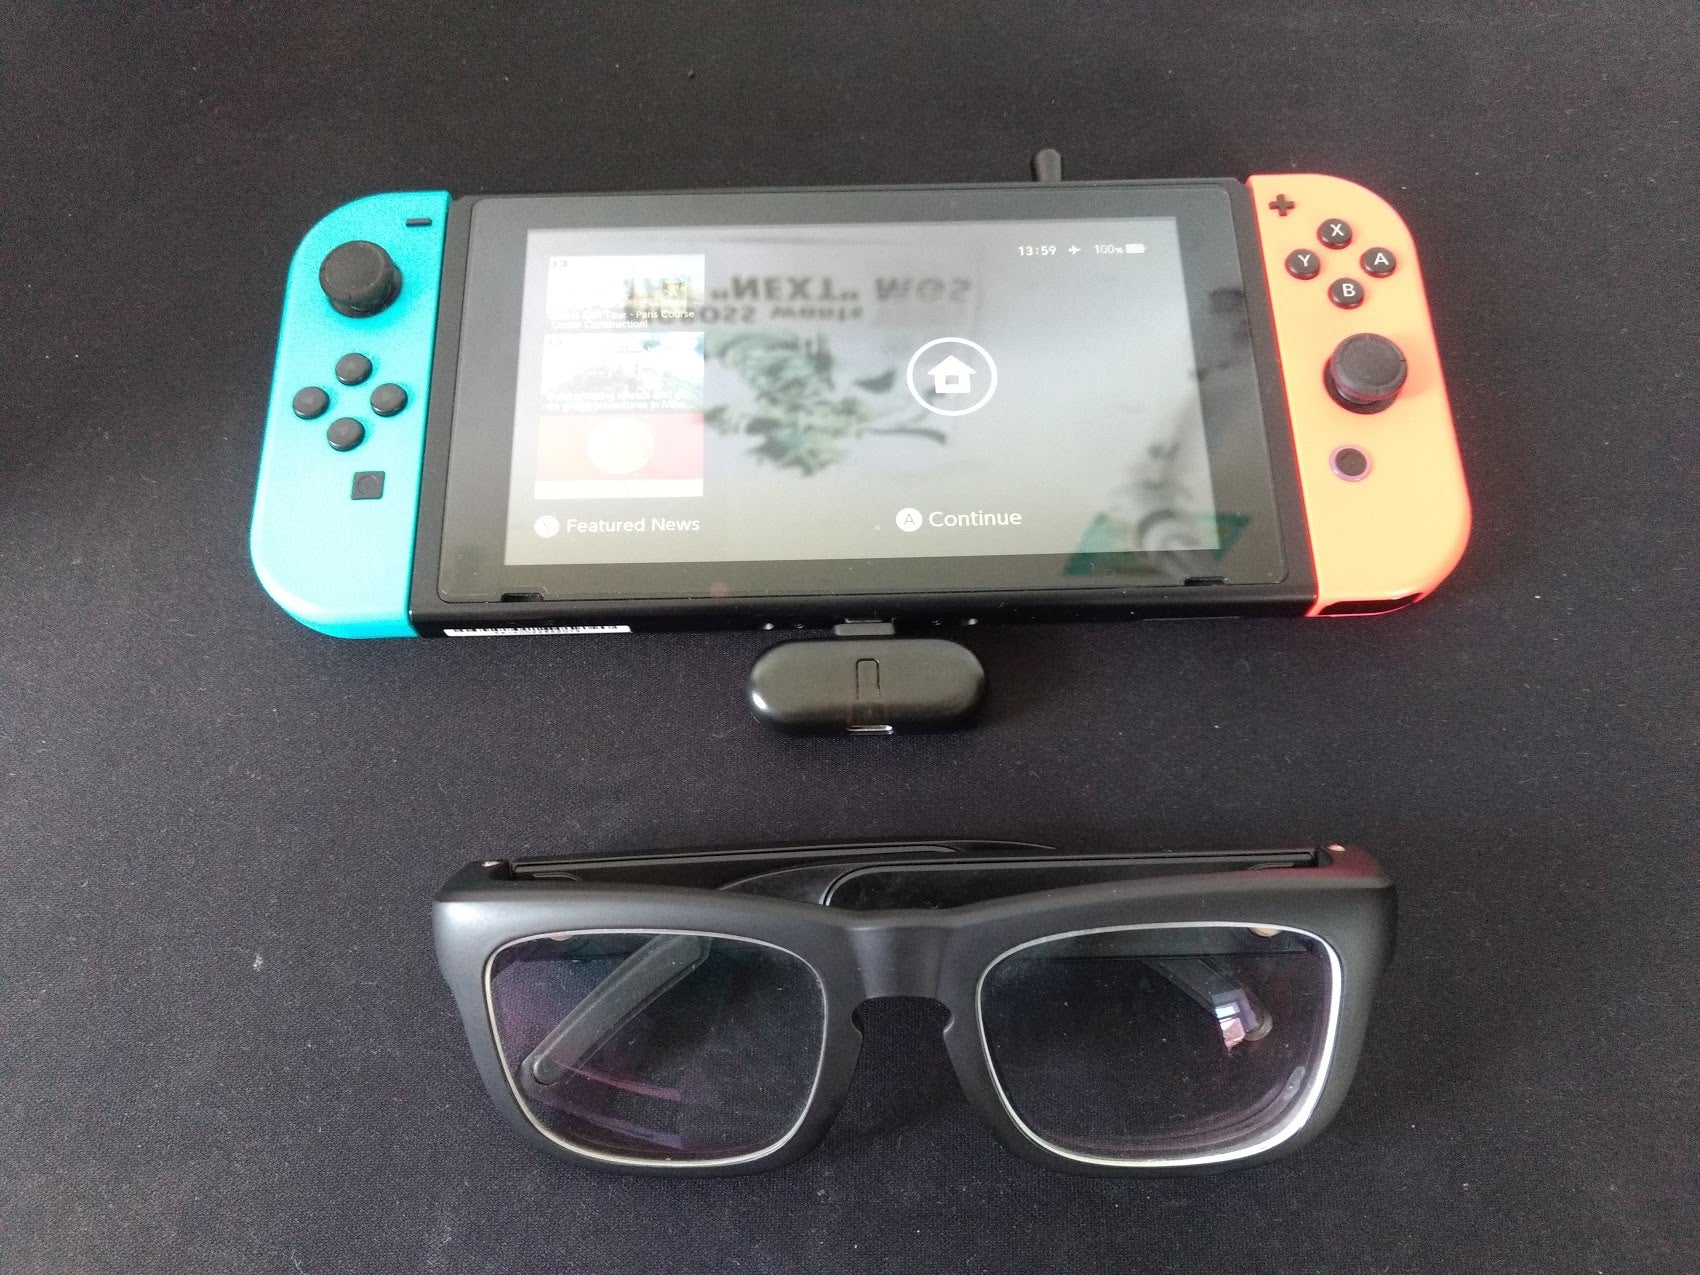 Of course, these mutrics sunglasses experiences extend to gaming as well